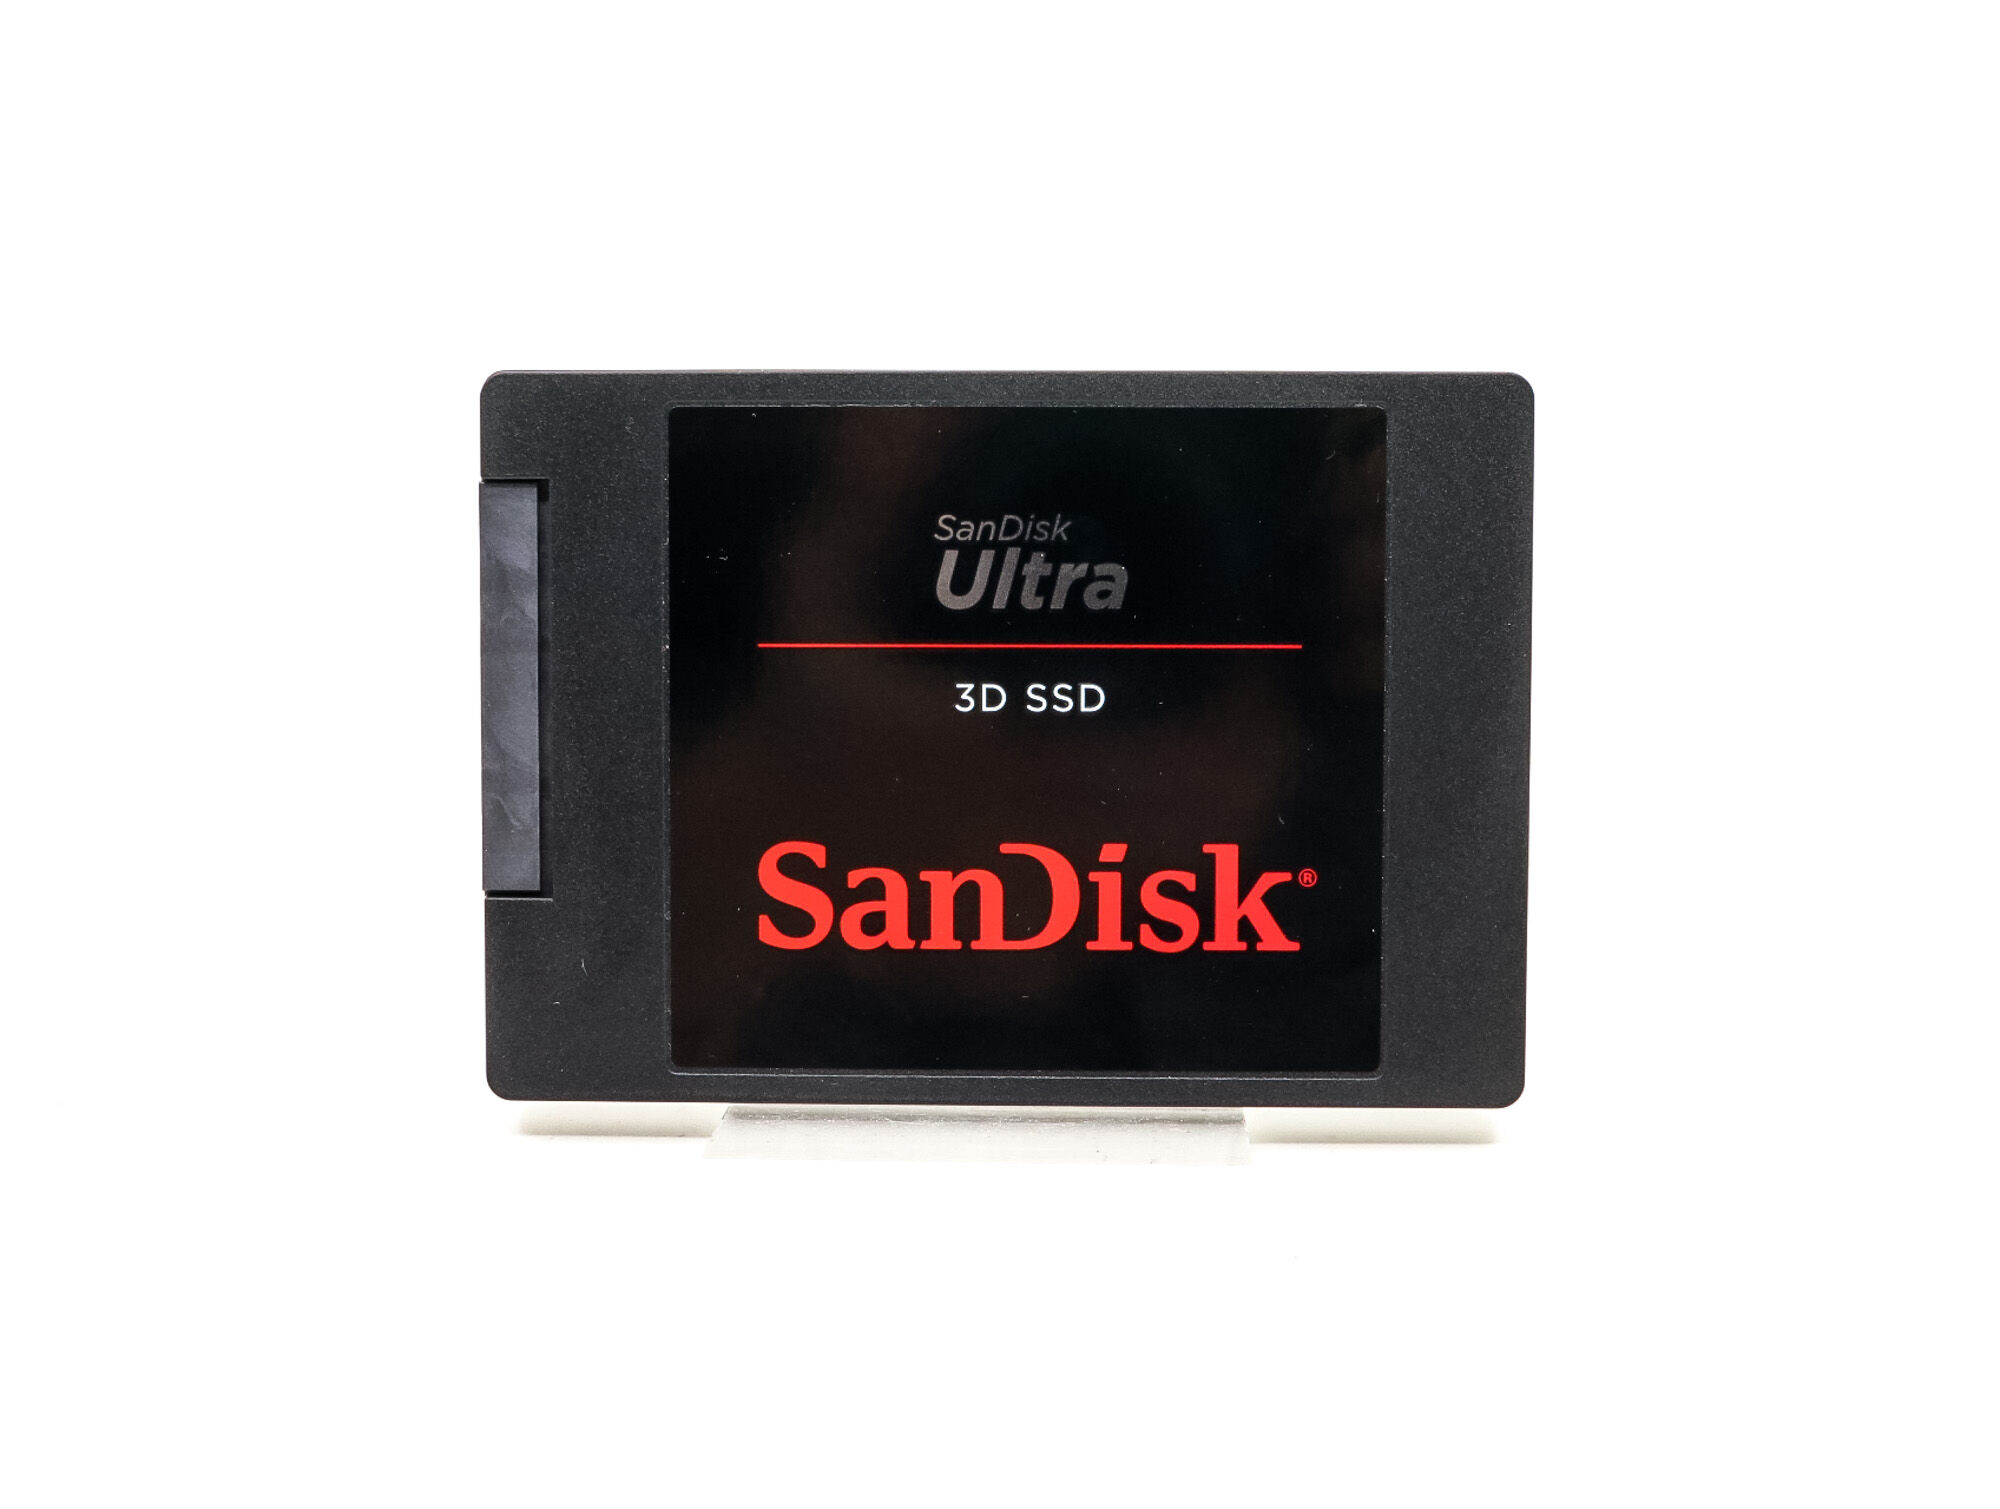 SanDisk Ultra 3D NAND 1TB Internal SSD SATA III (Condition: Excellent)